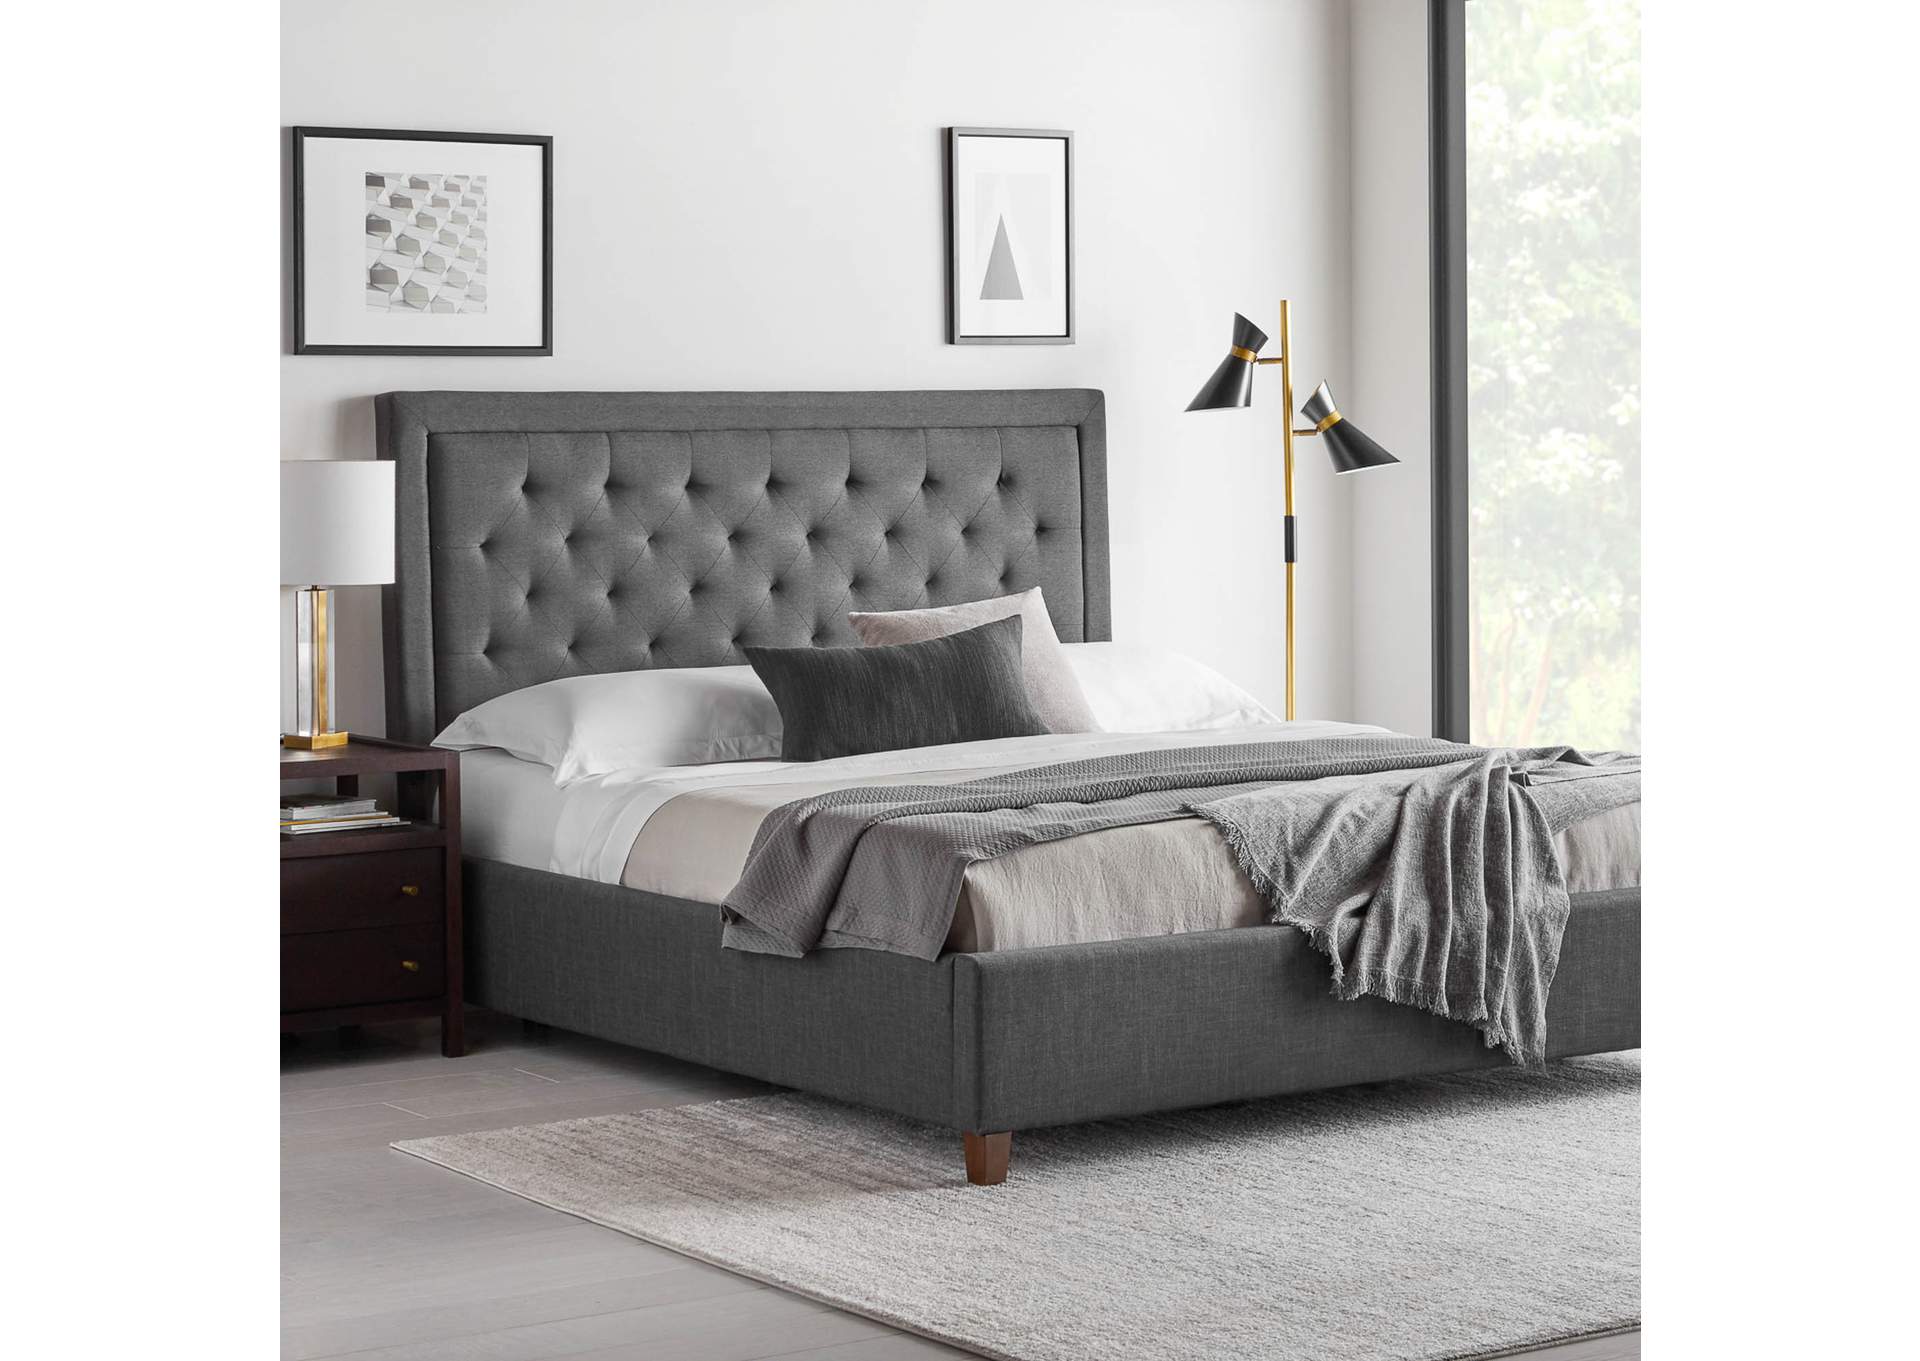 Malouf Charcoal Eastman Upholstered Platform Queen Bed,Malouf